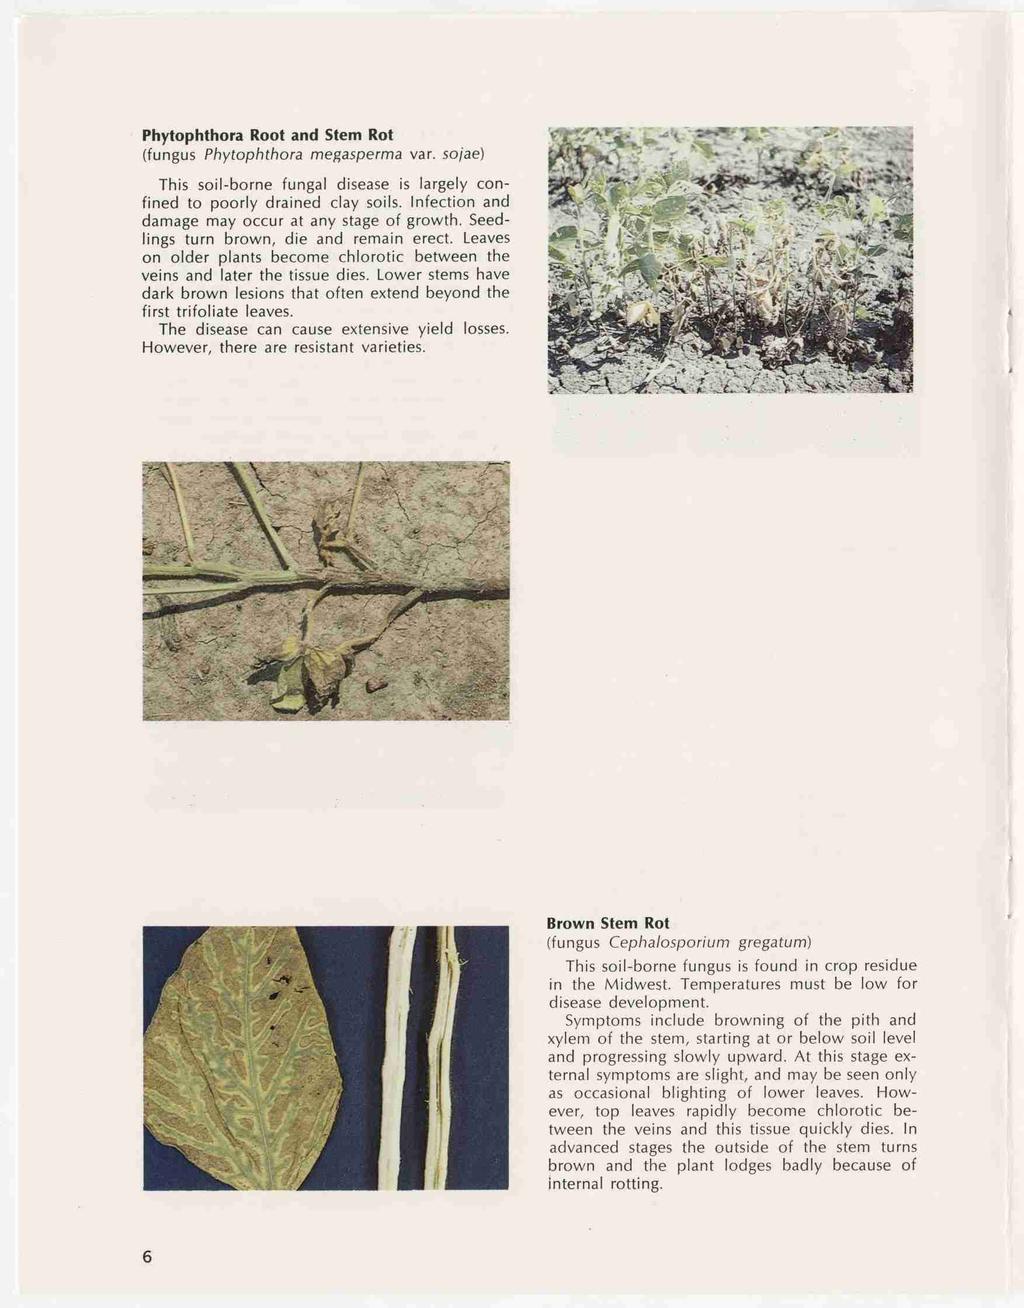 Phytophthora Root and Stem Rot (fungus Phytophthora megasperma var. sojae) This soil-borne fungal disease is largely con fined to poorly drained clay soils.